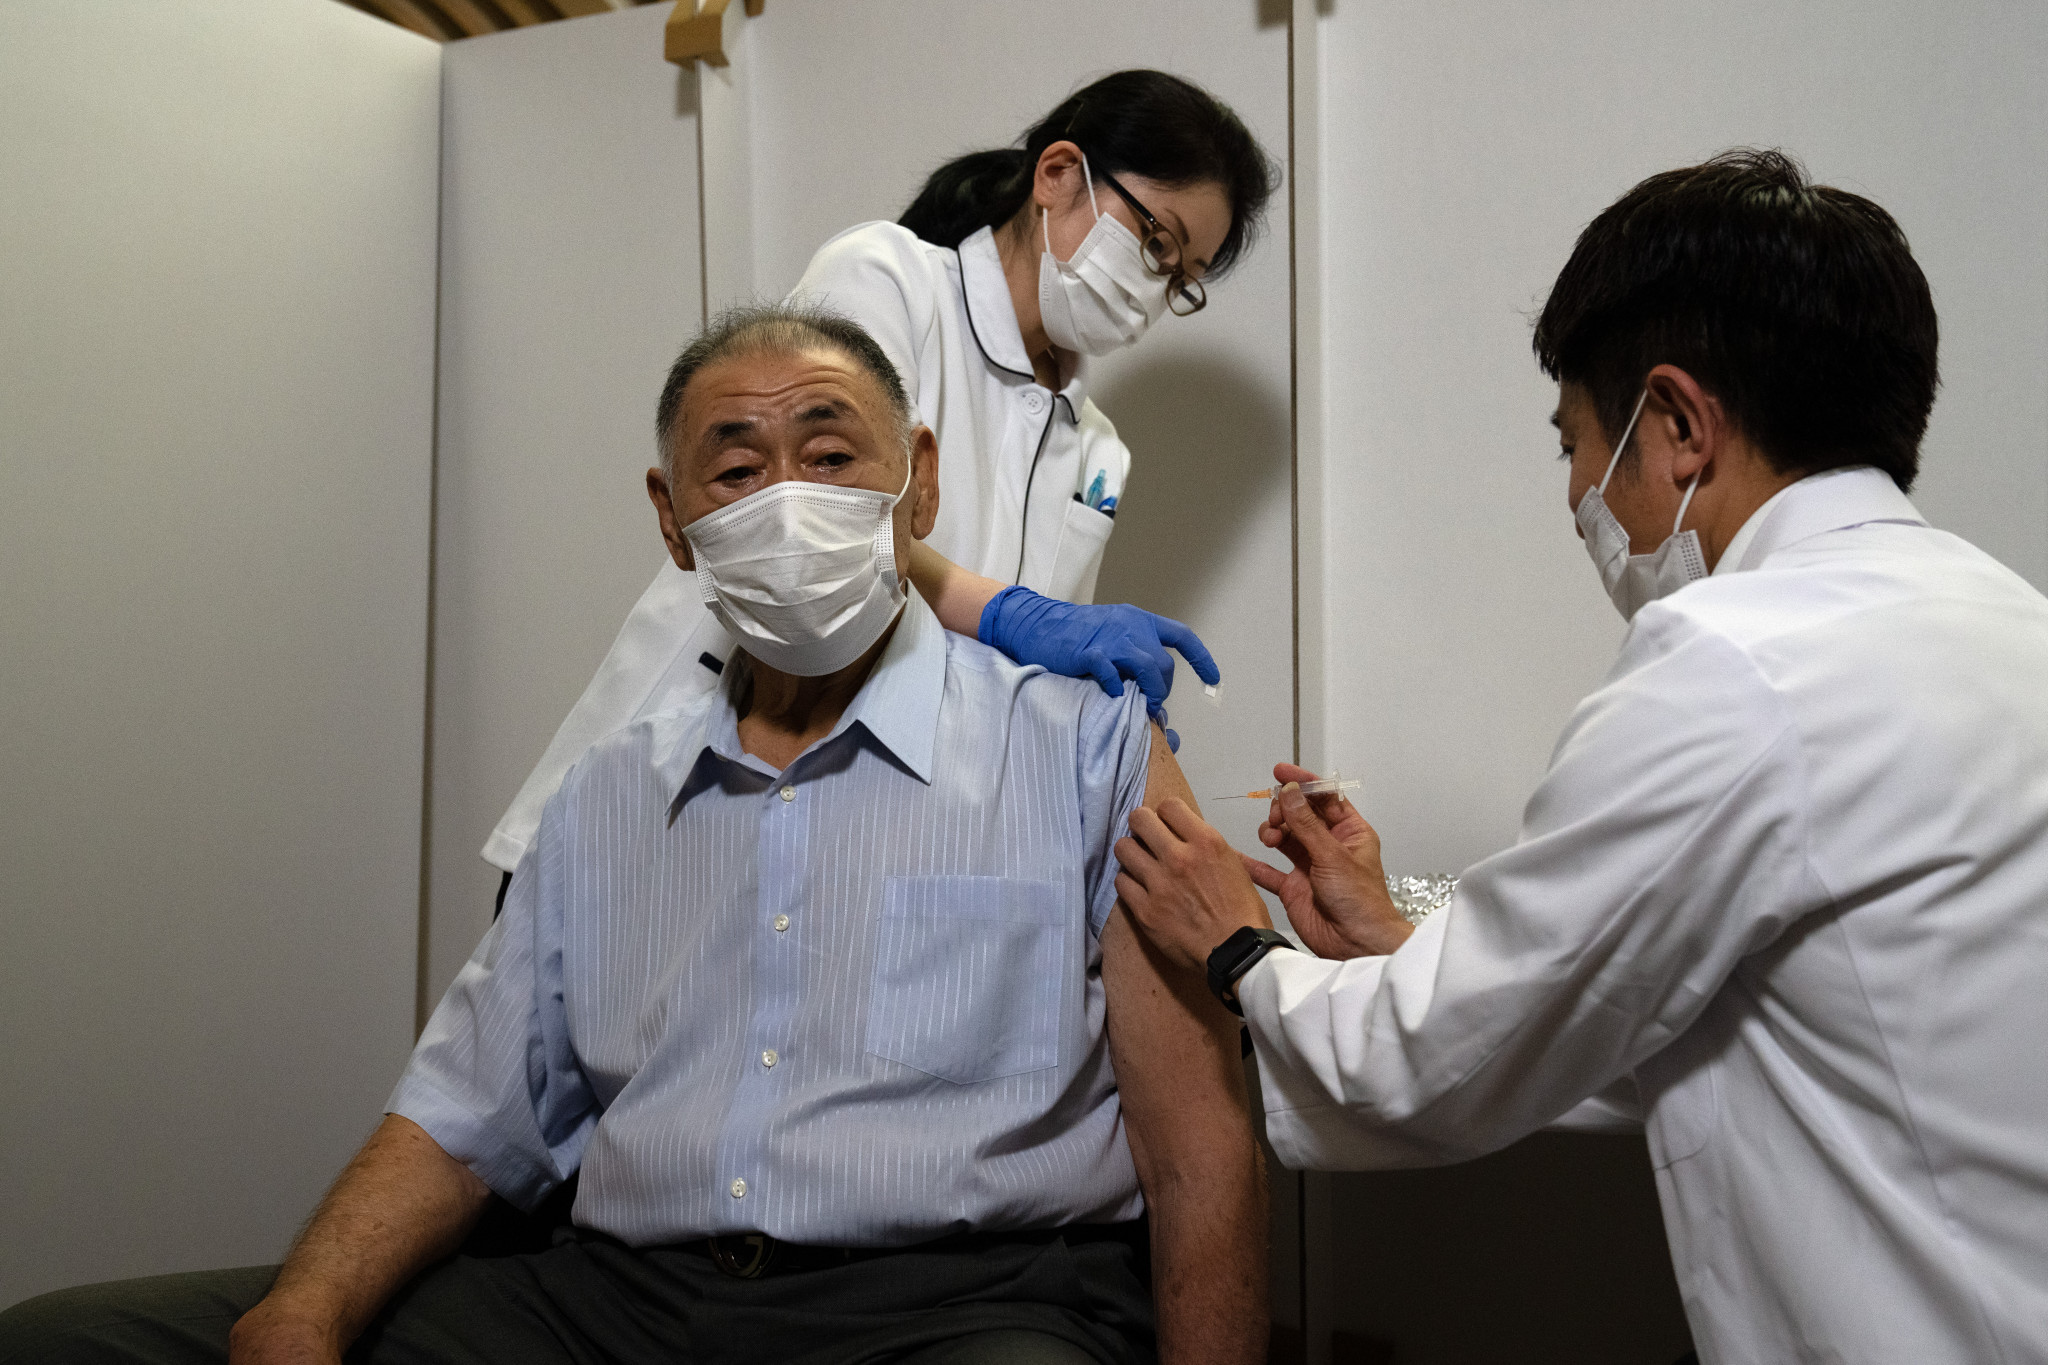 Vaccination+centres+Japan+GettyImages-1233080362.jpg